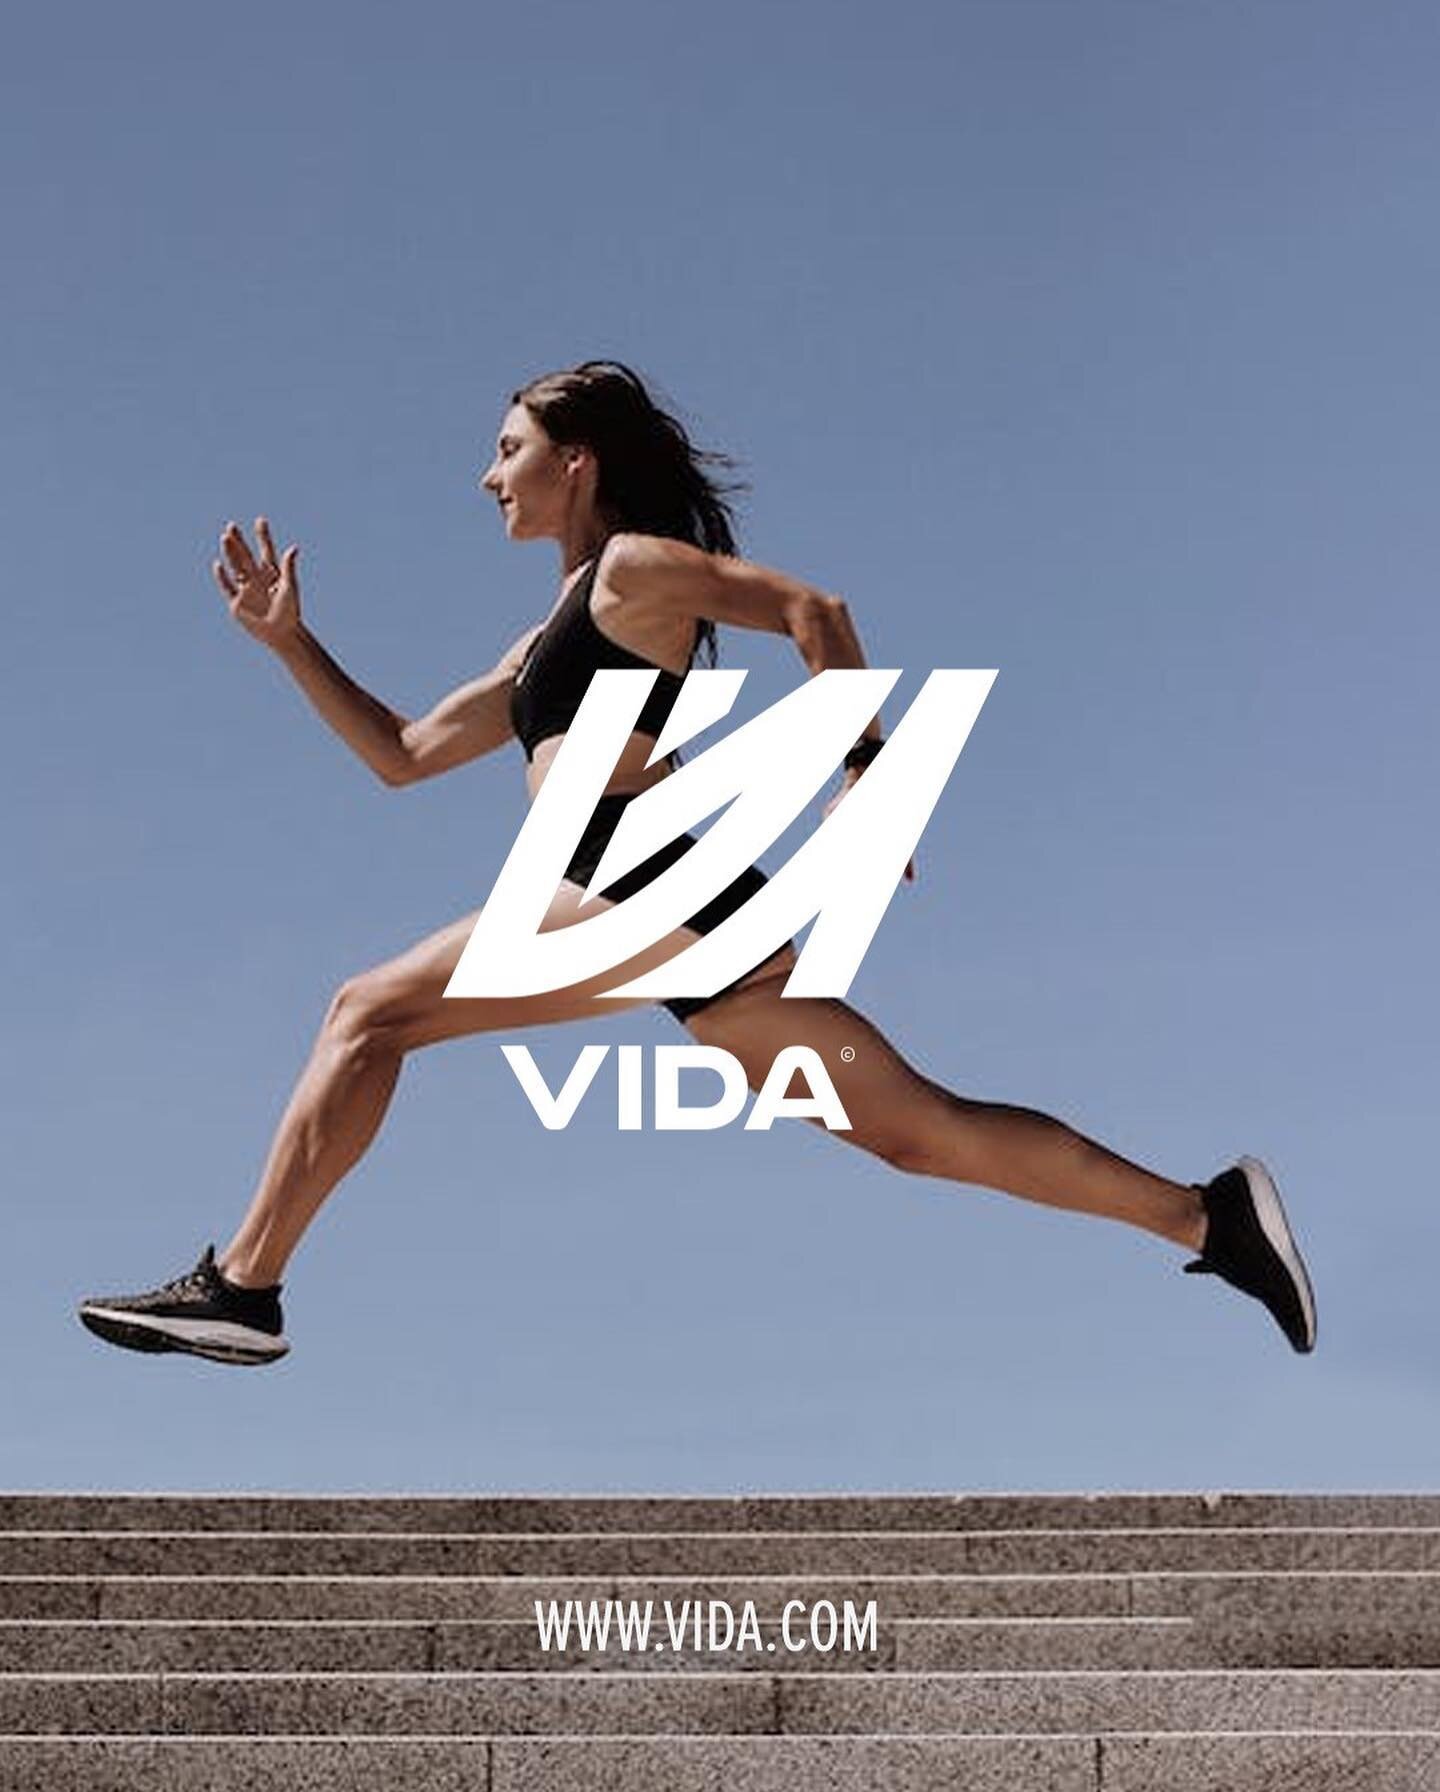 VIDA is a sportswear and outerwear company that aims to motivate people to push their limits by staying fit and active. 

You can also customise your clothing and accessories for you to personally enjoy hitting your fit goals 🏃&zwj;♂️💪🏻

Does this